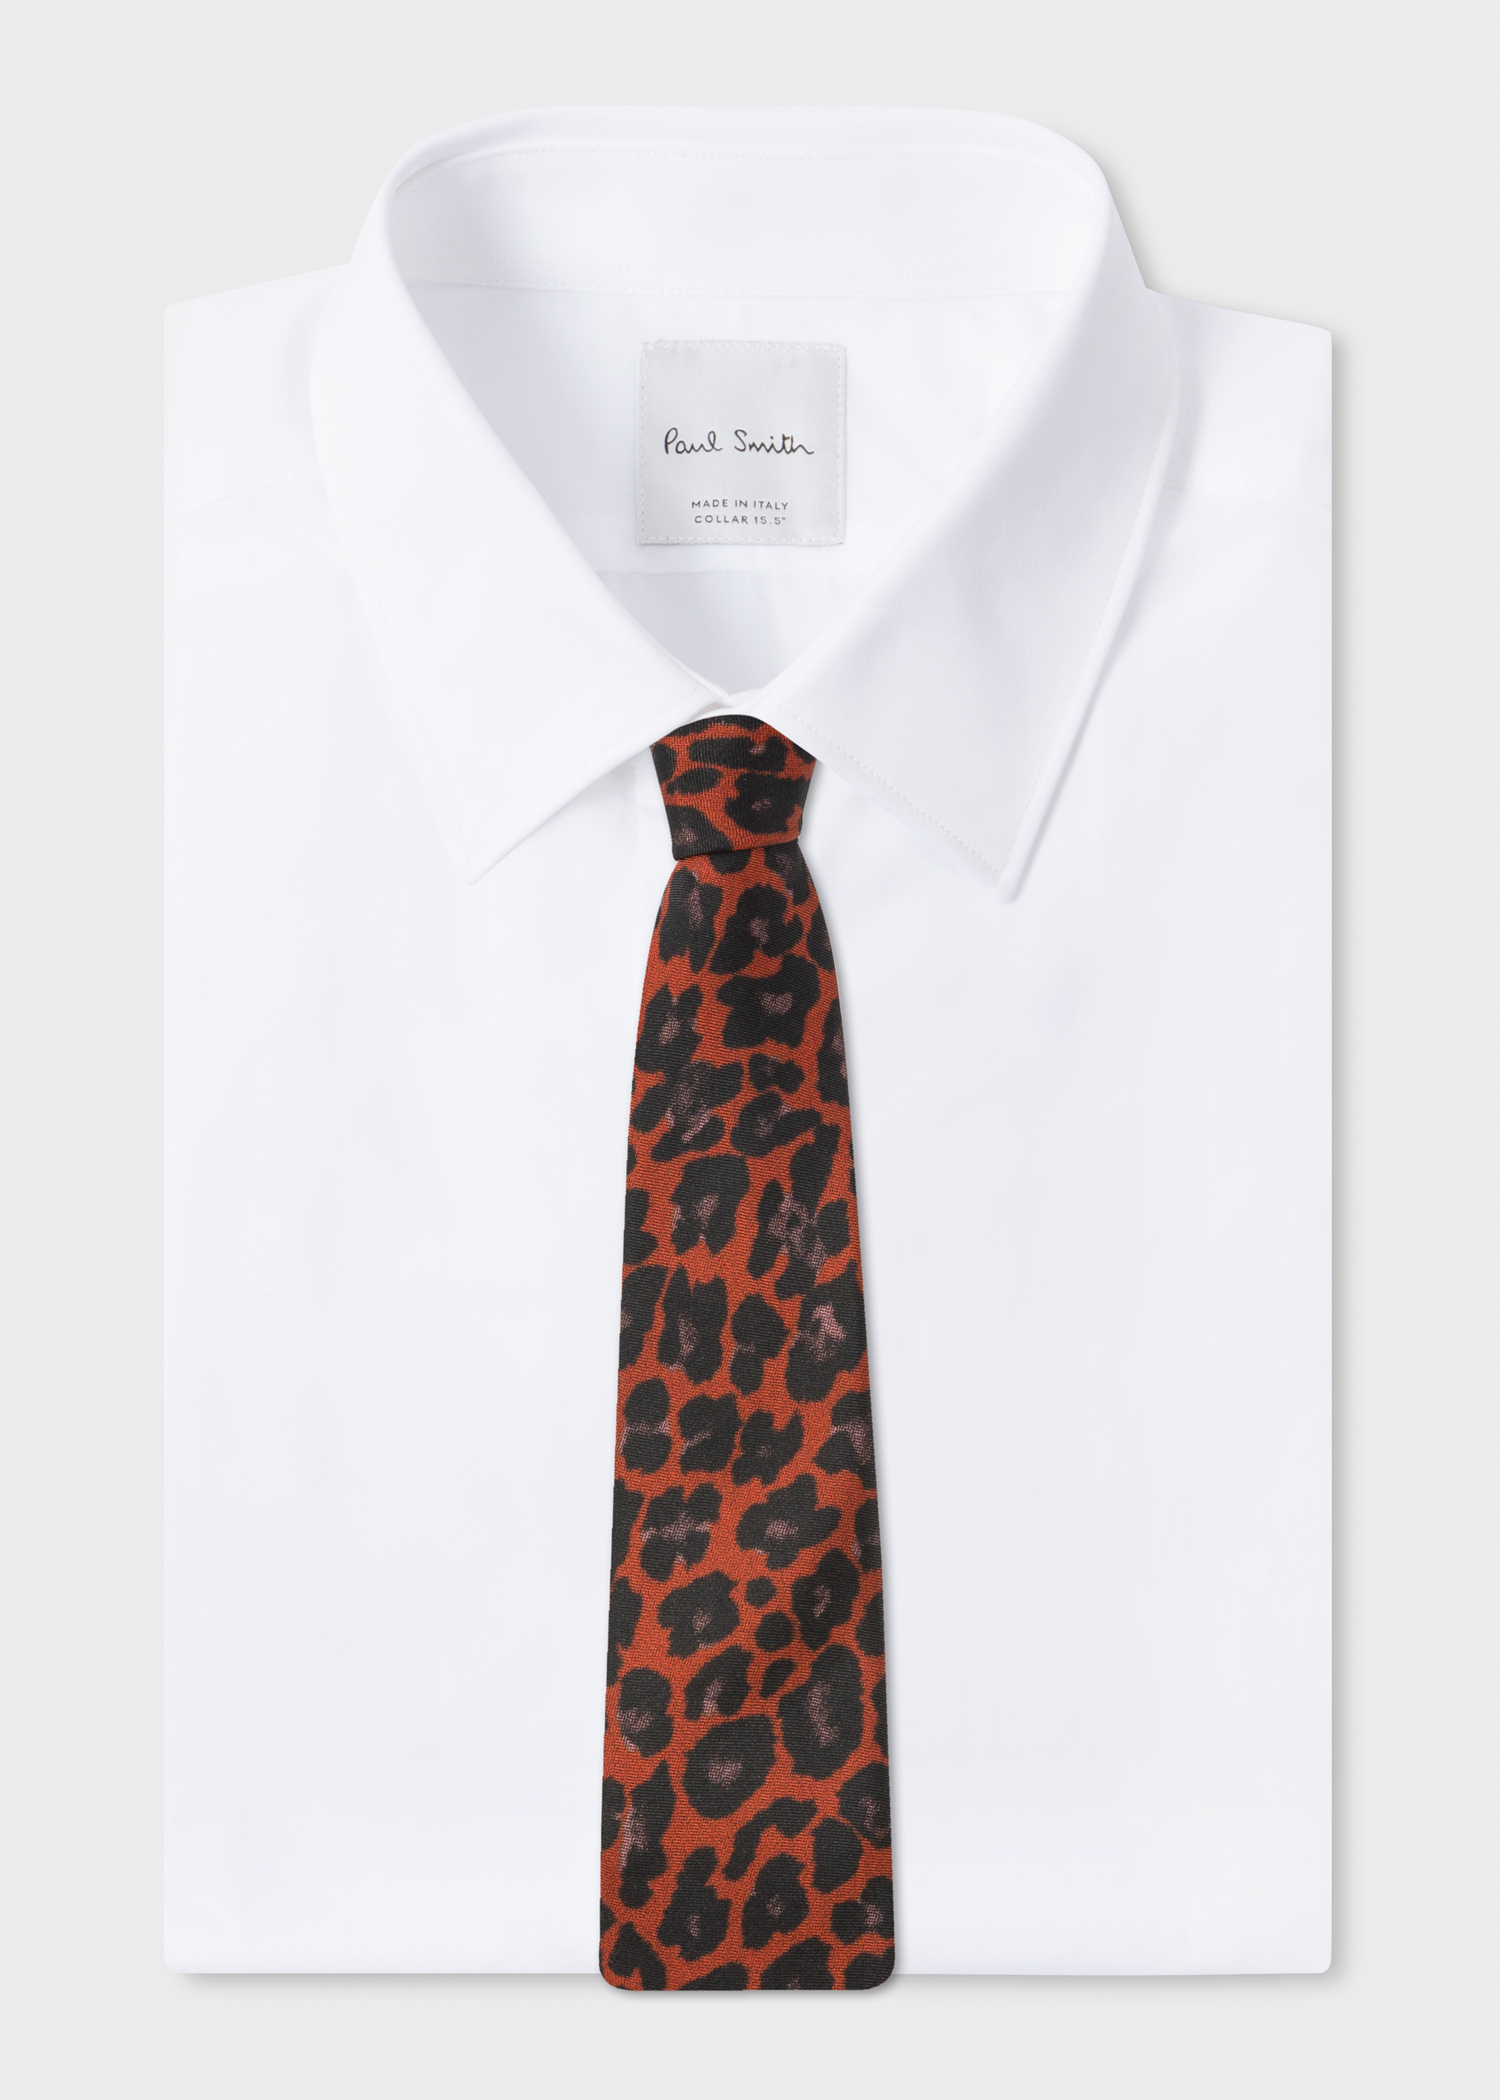 On shirt view - Men's Red Leopard Print Silk Tie Paul Smith